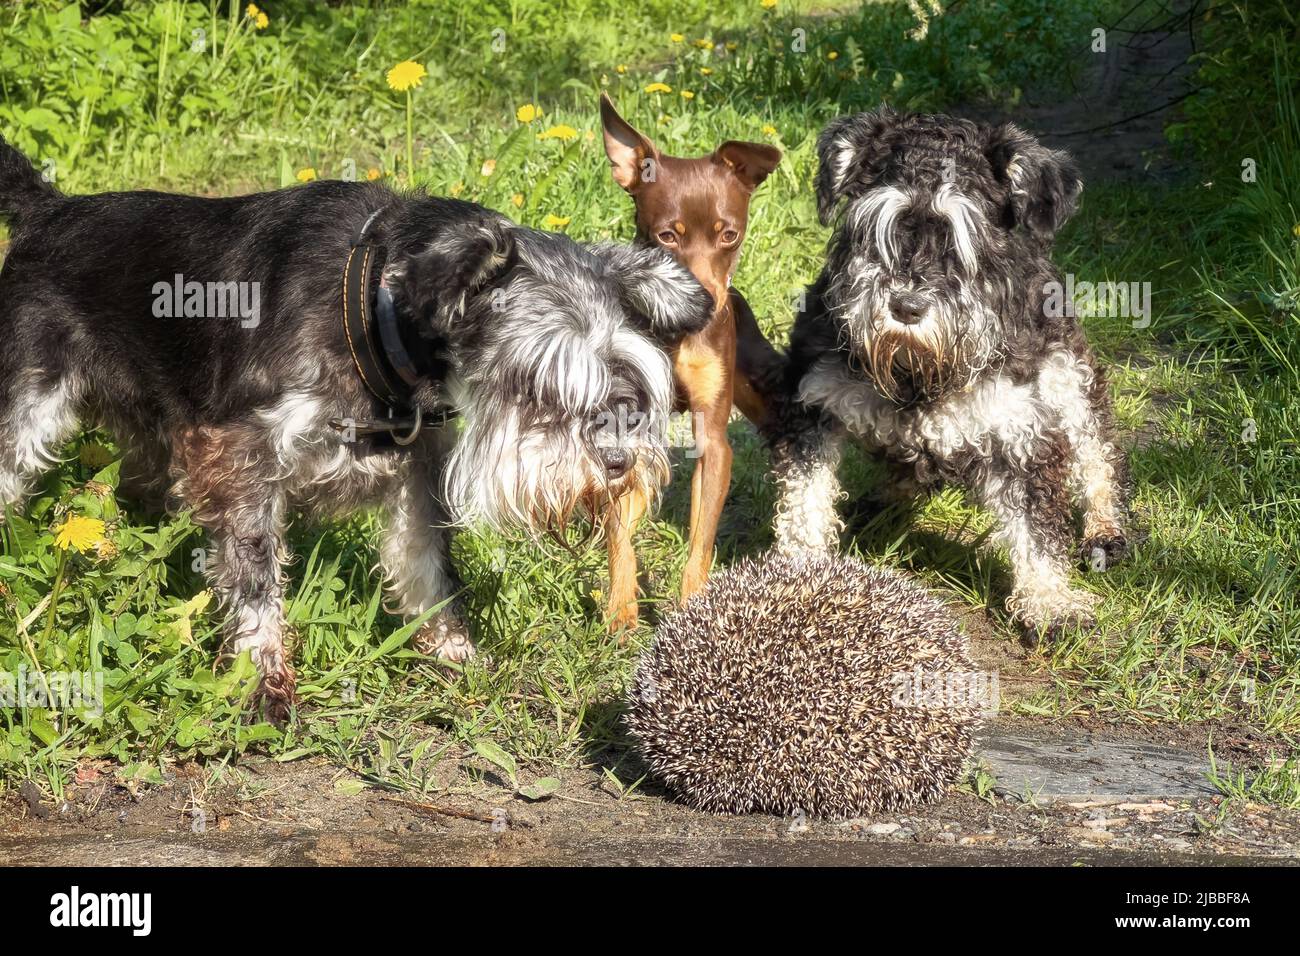 Three dogs barking on a hedgehog. Wild animals often carry infectious diseases such as distemper. Stock Photo